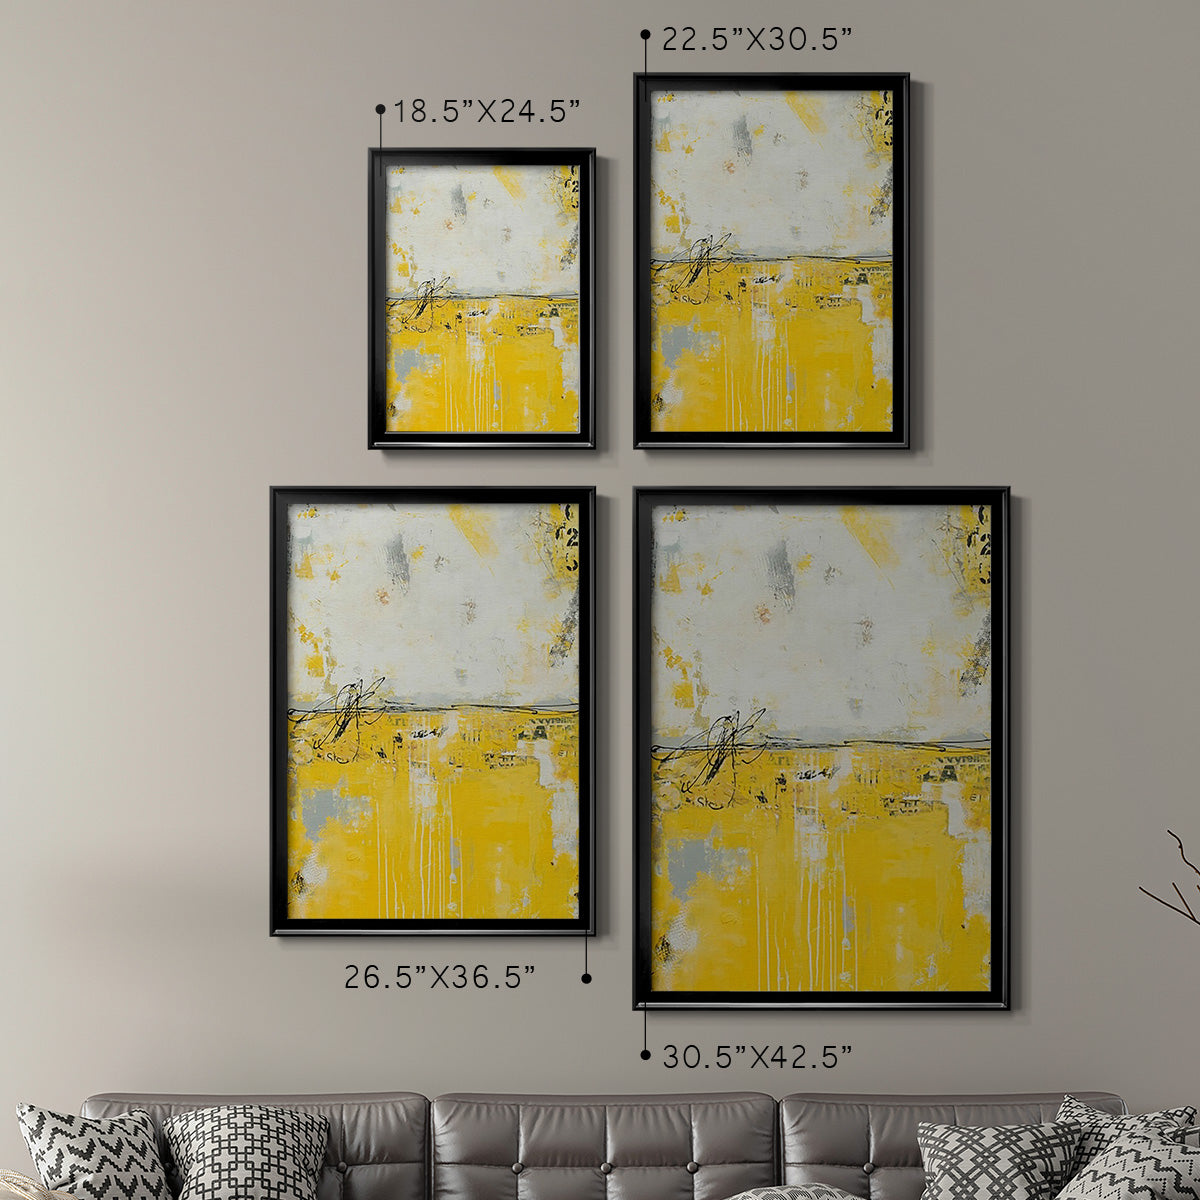 Yellow Bound Premium Framed Print - Ready to Hang